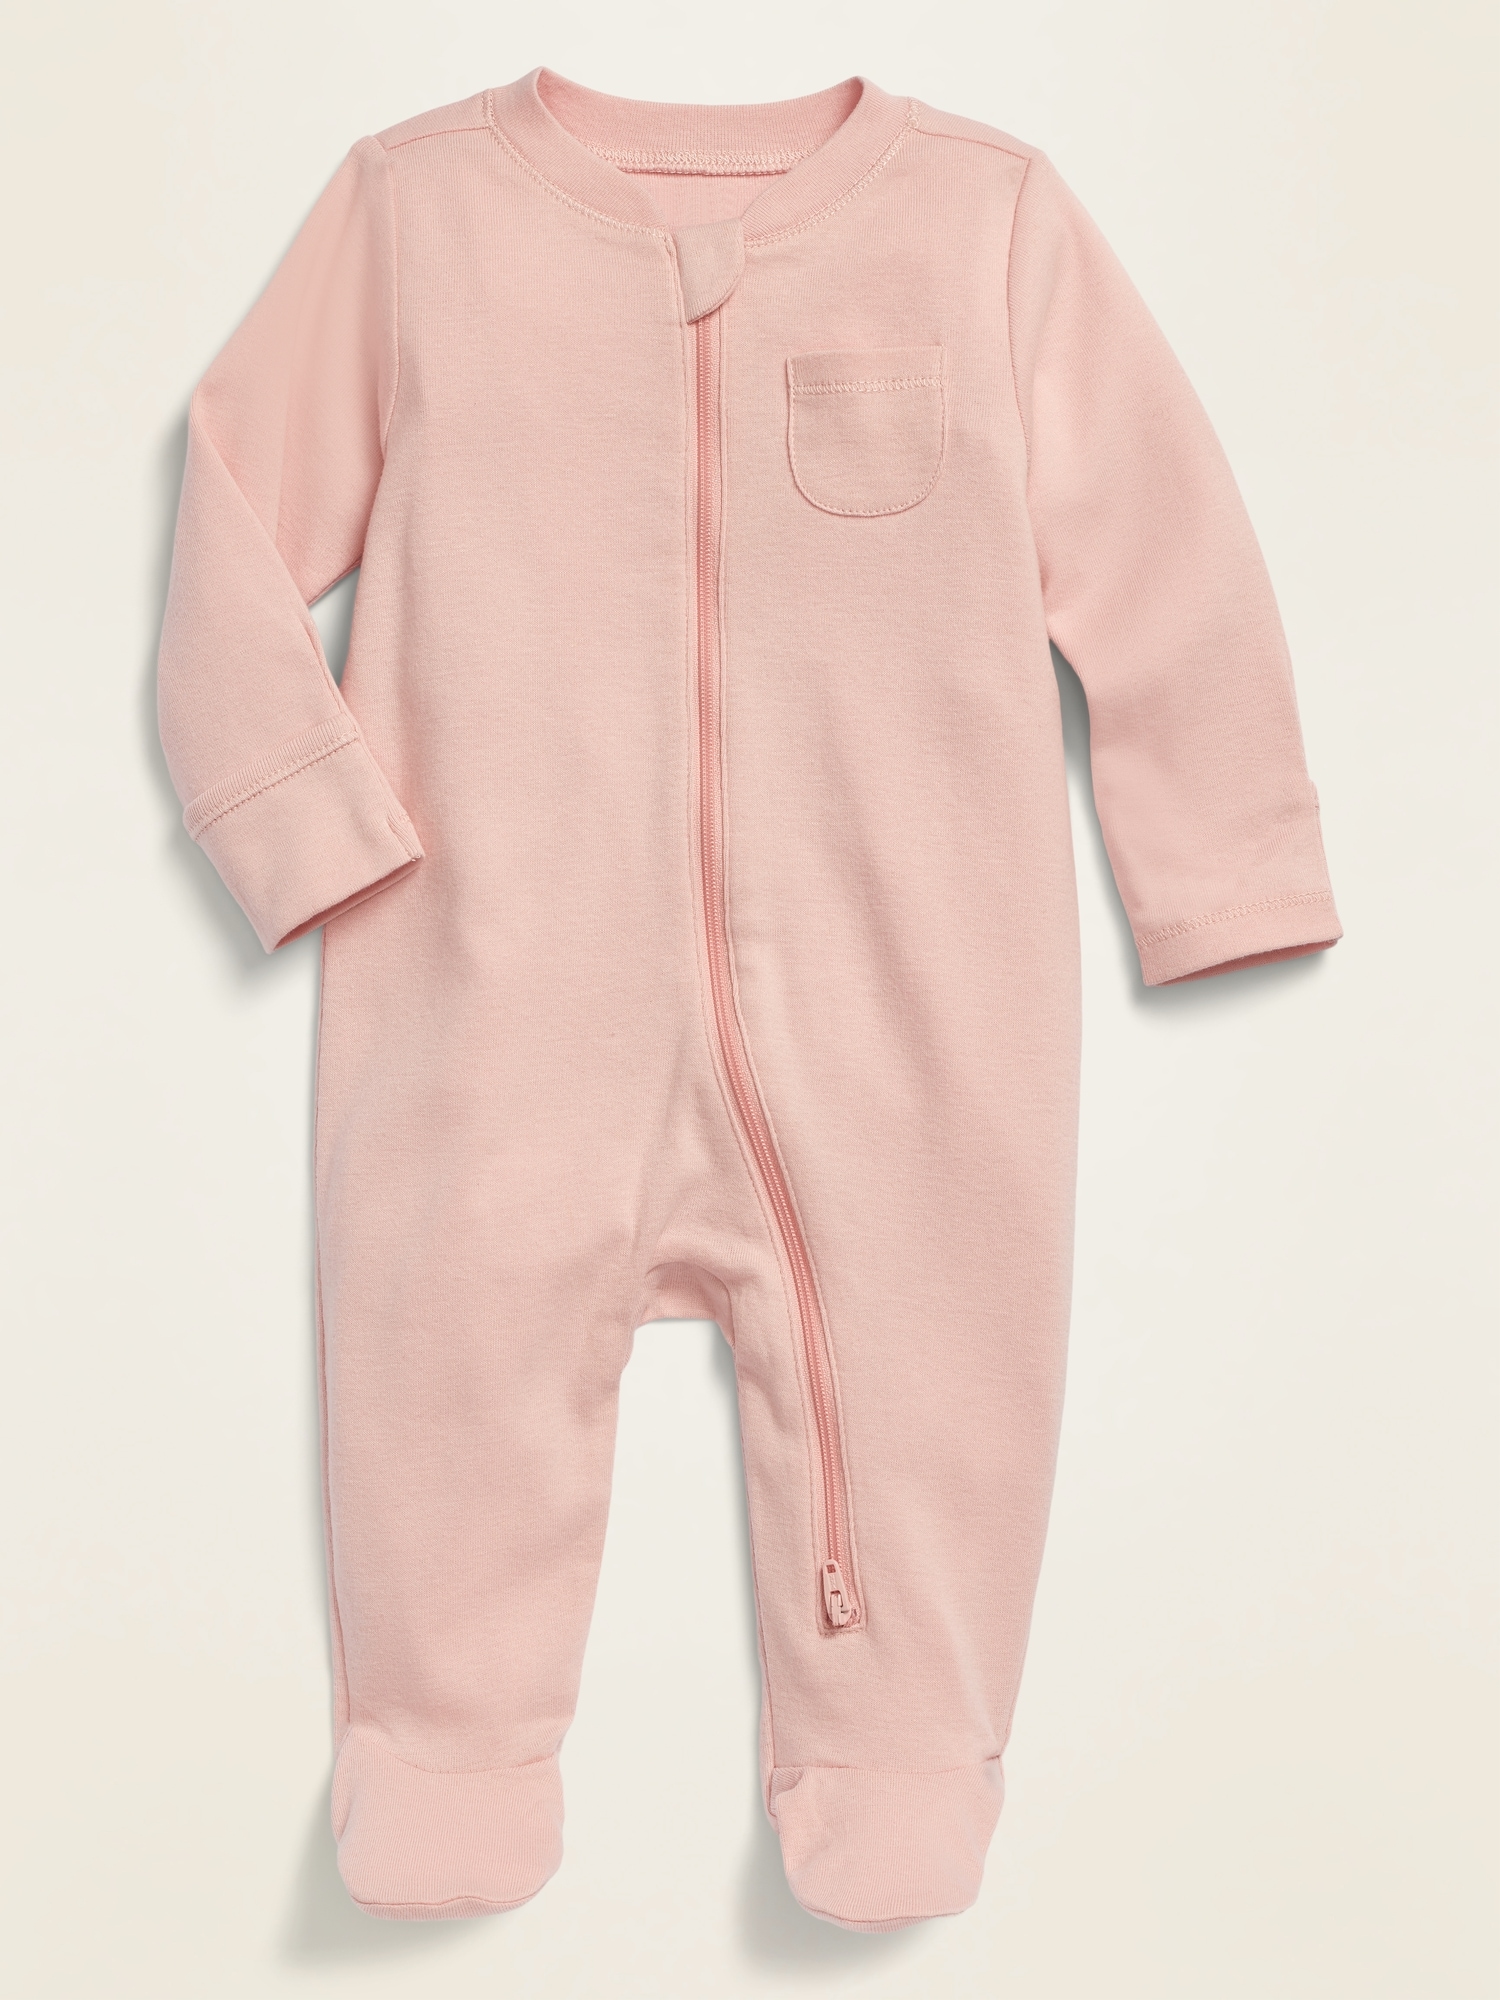 Unisex Sleep Play Footed One Piece For Baby Old Navy